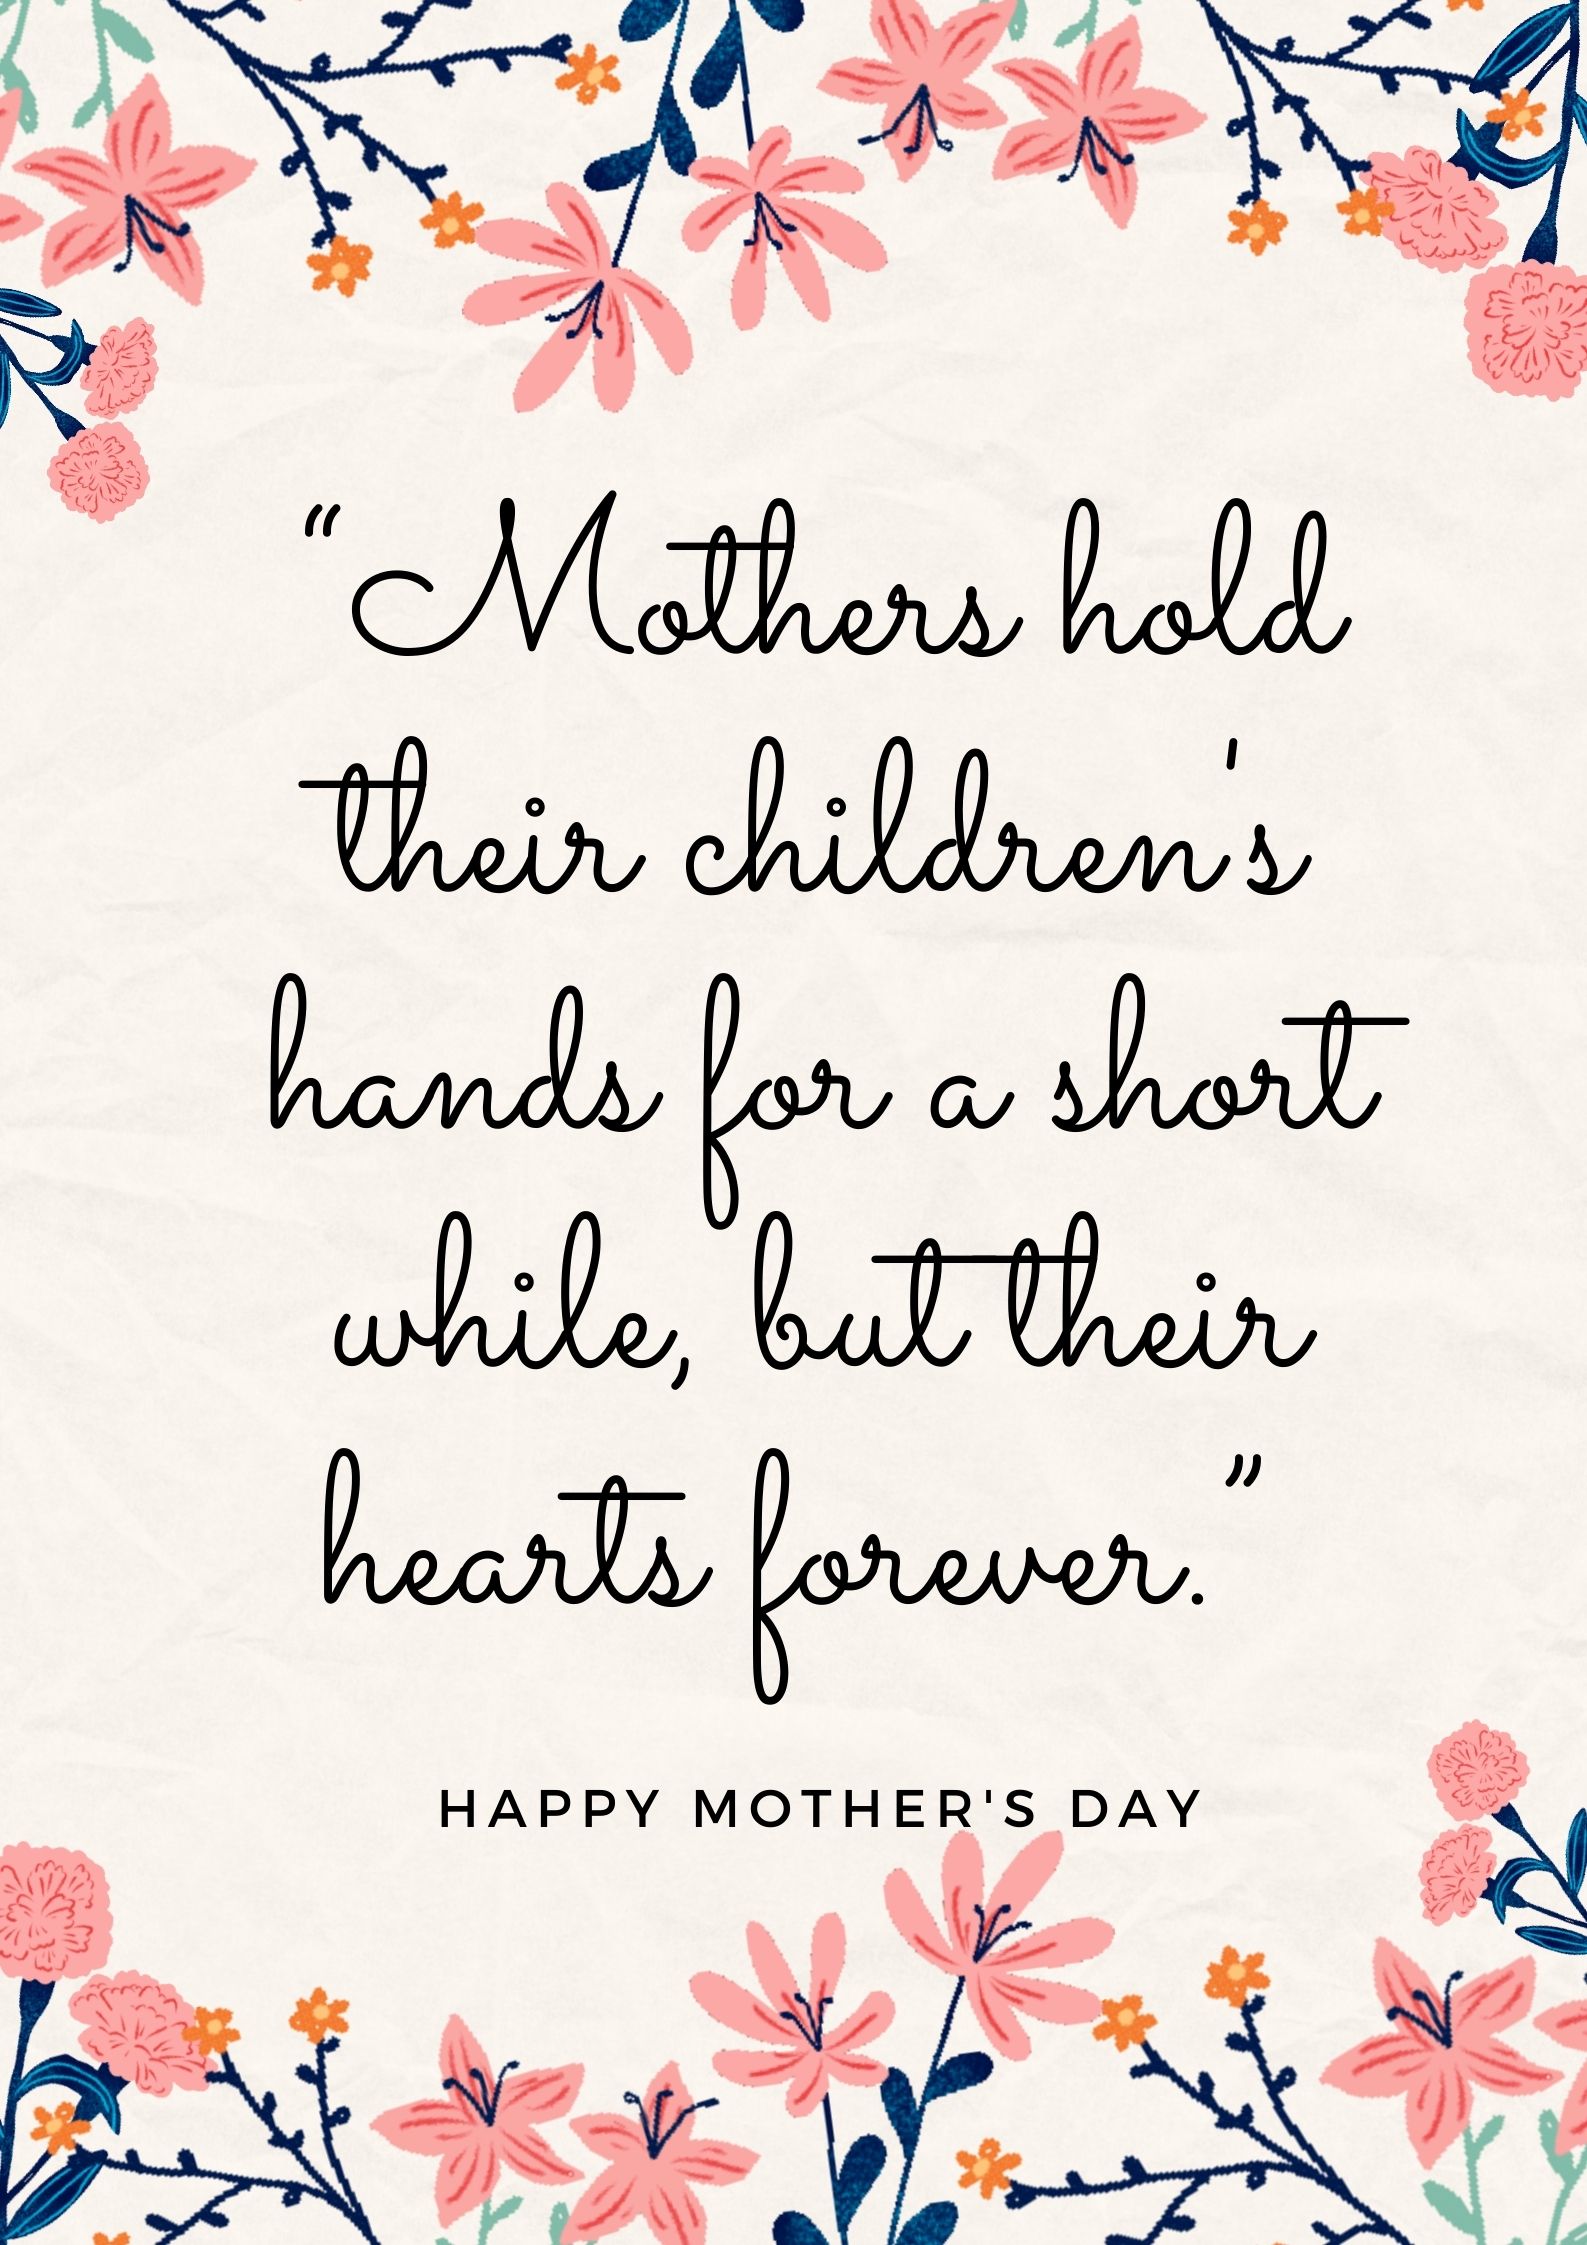 Mother's Day quotes 2021 å